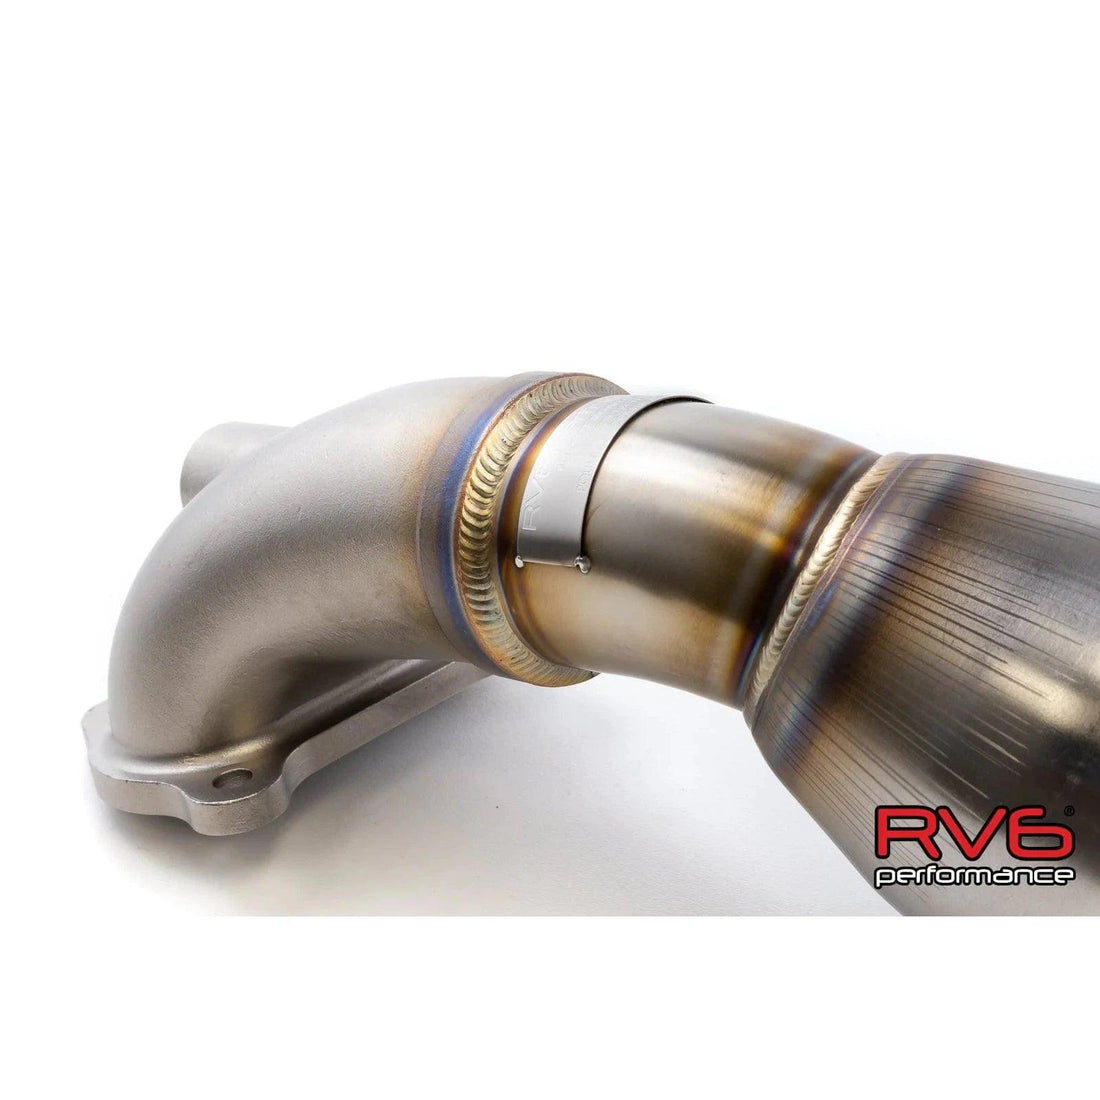 RV6 Performance Catted Downpipe Upgrade for 2016-2021 Civic 2.0L N/A - Saikospeed